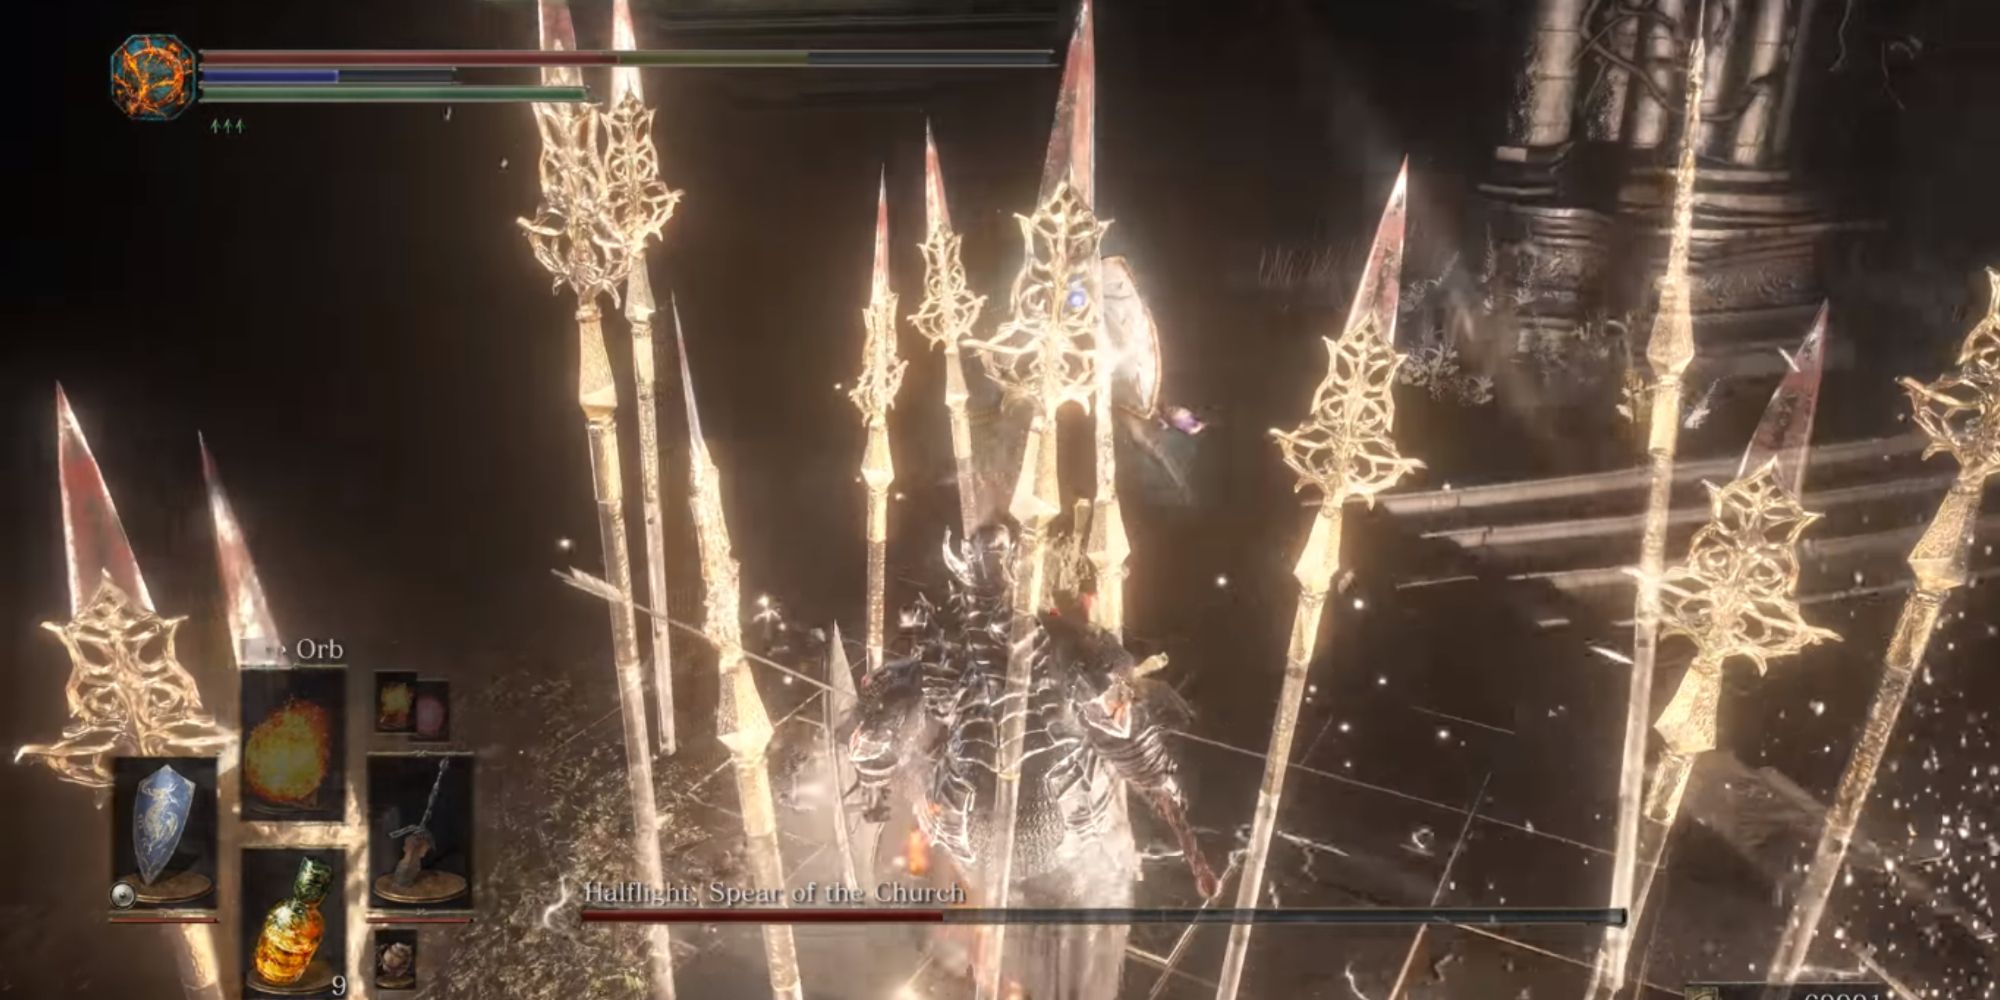 The boss using Ritual Spears to block you.